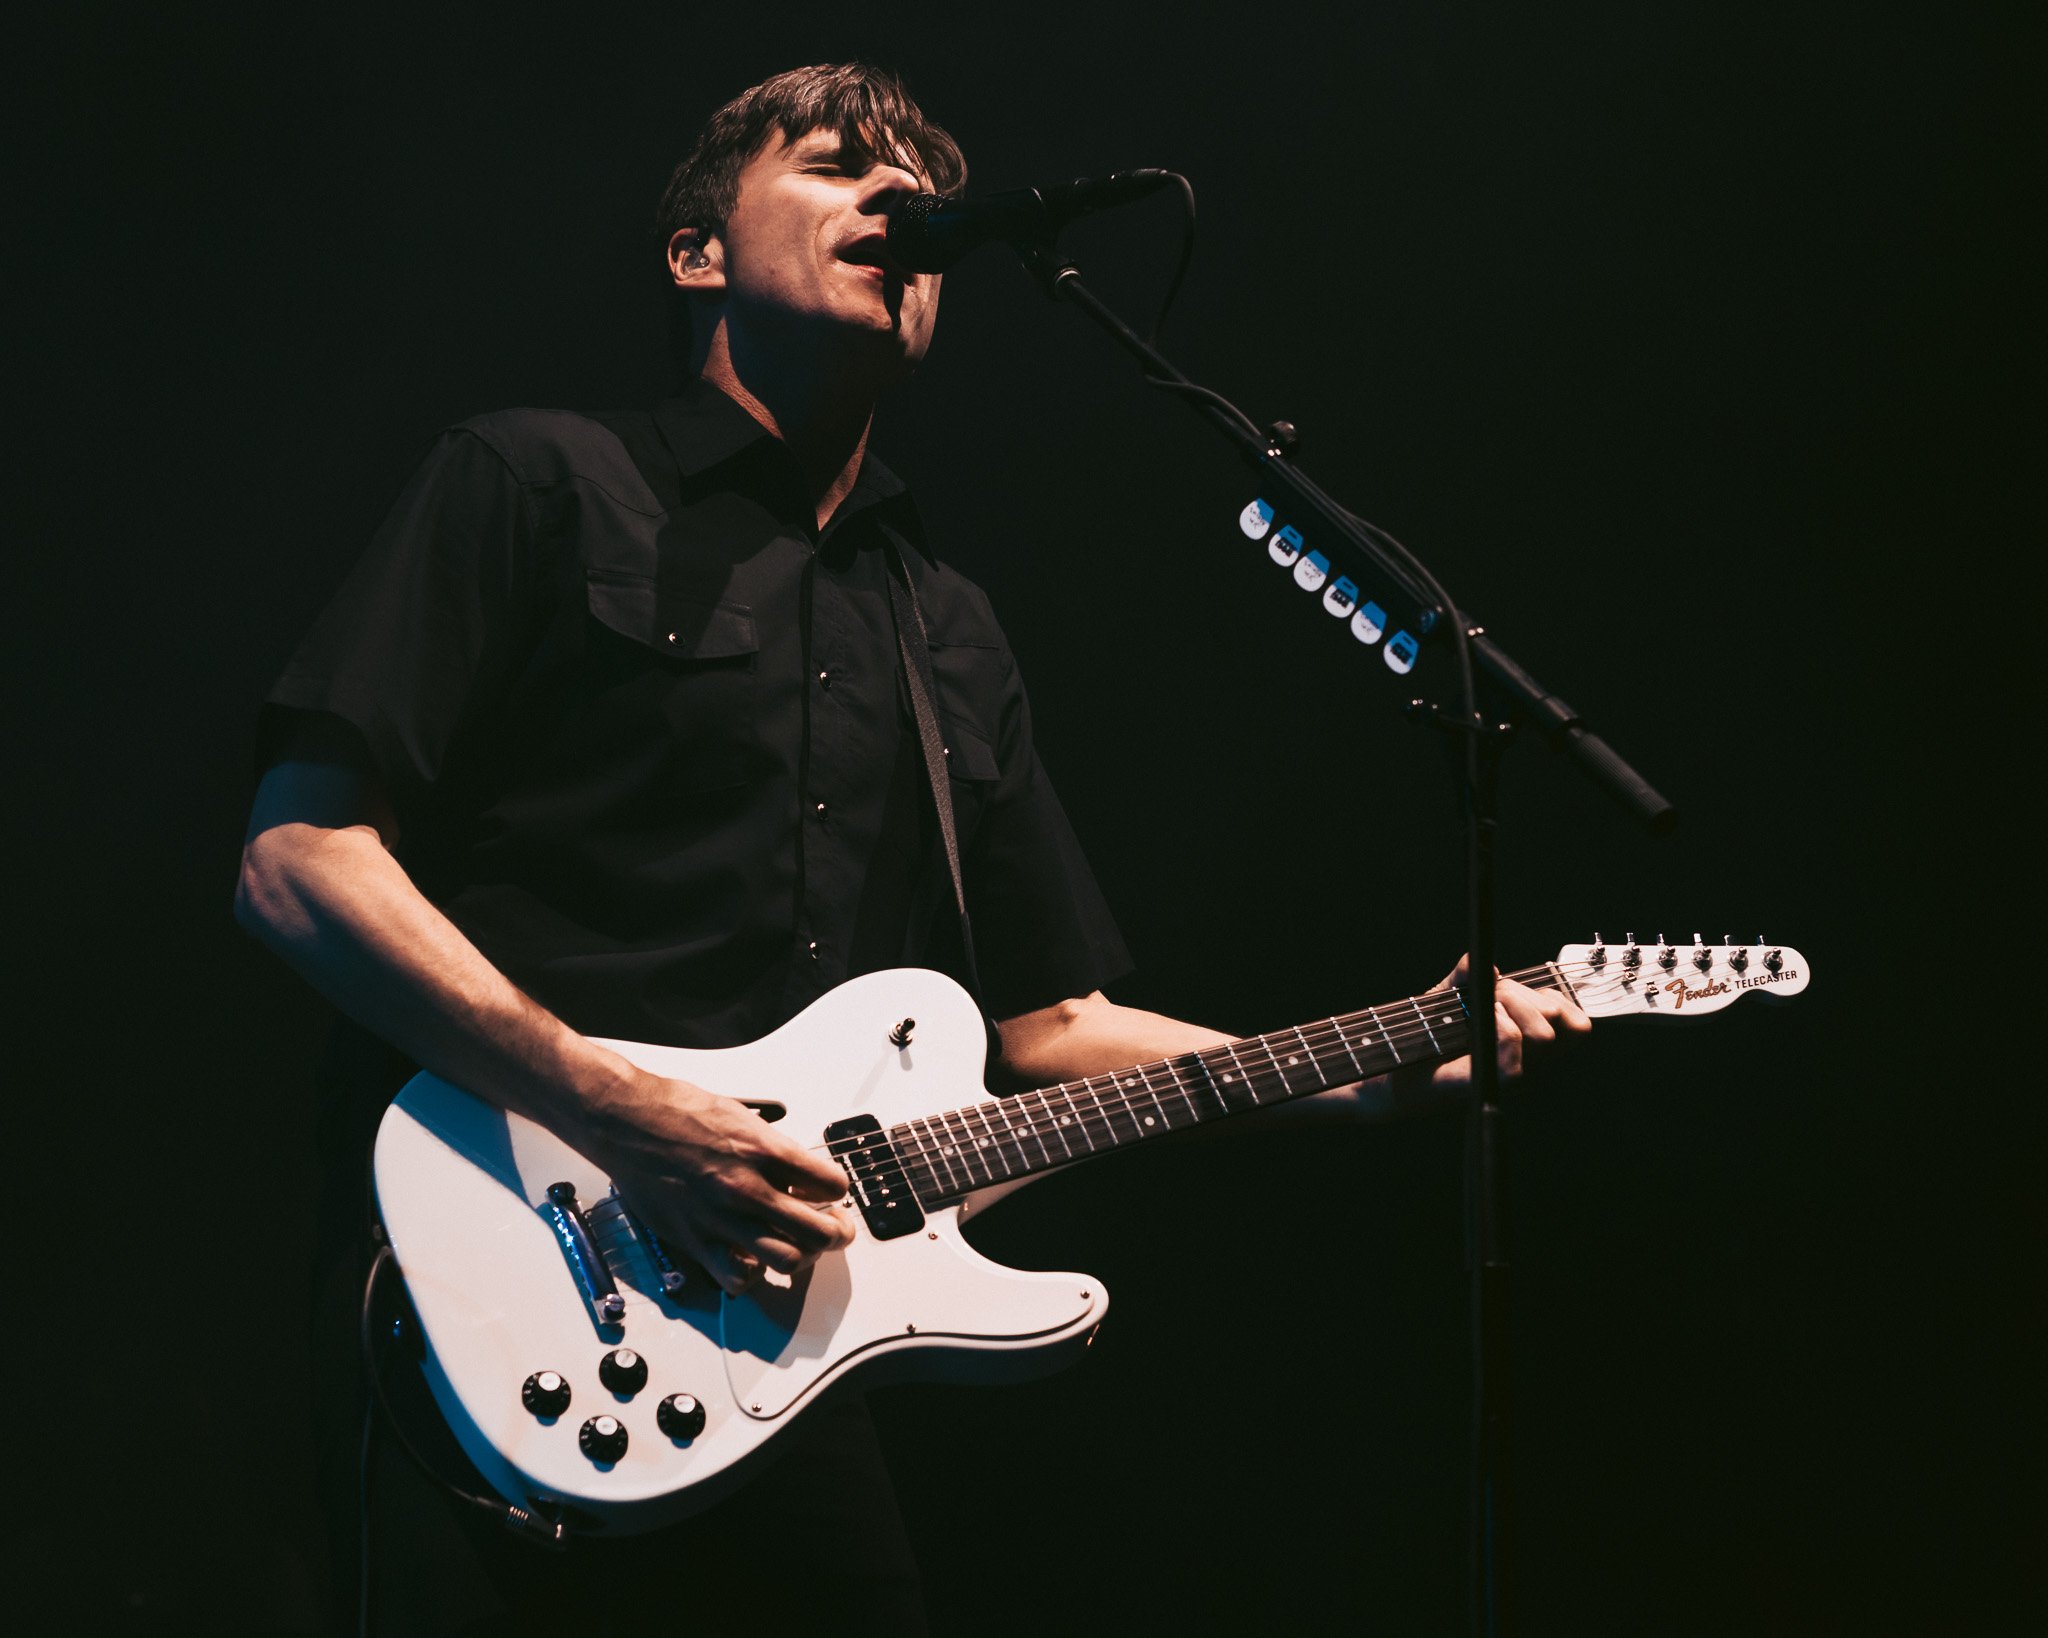  Jimmy Eat World frontman Jim Adkins opens up the band’s set with “A Praise Chorus.” 